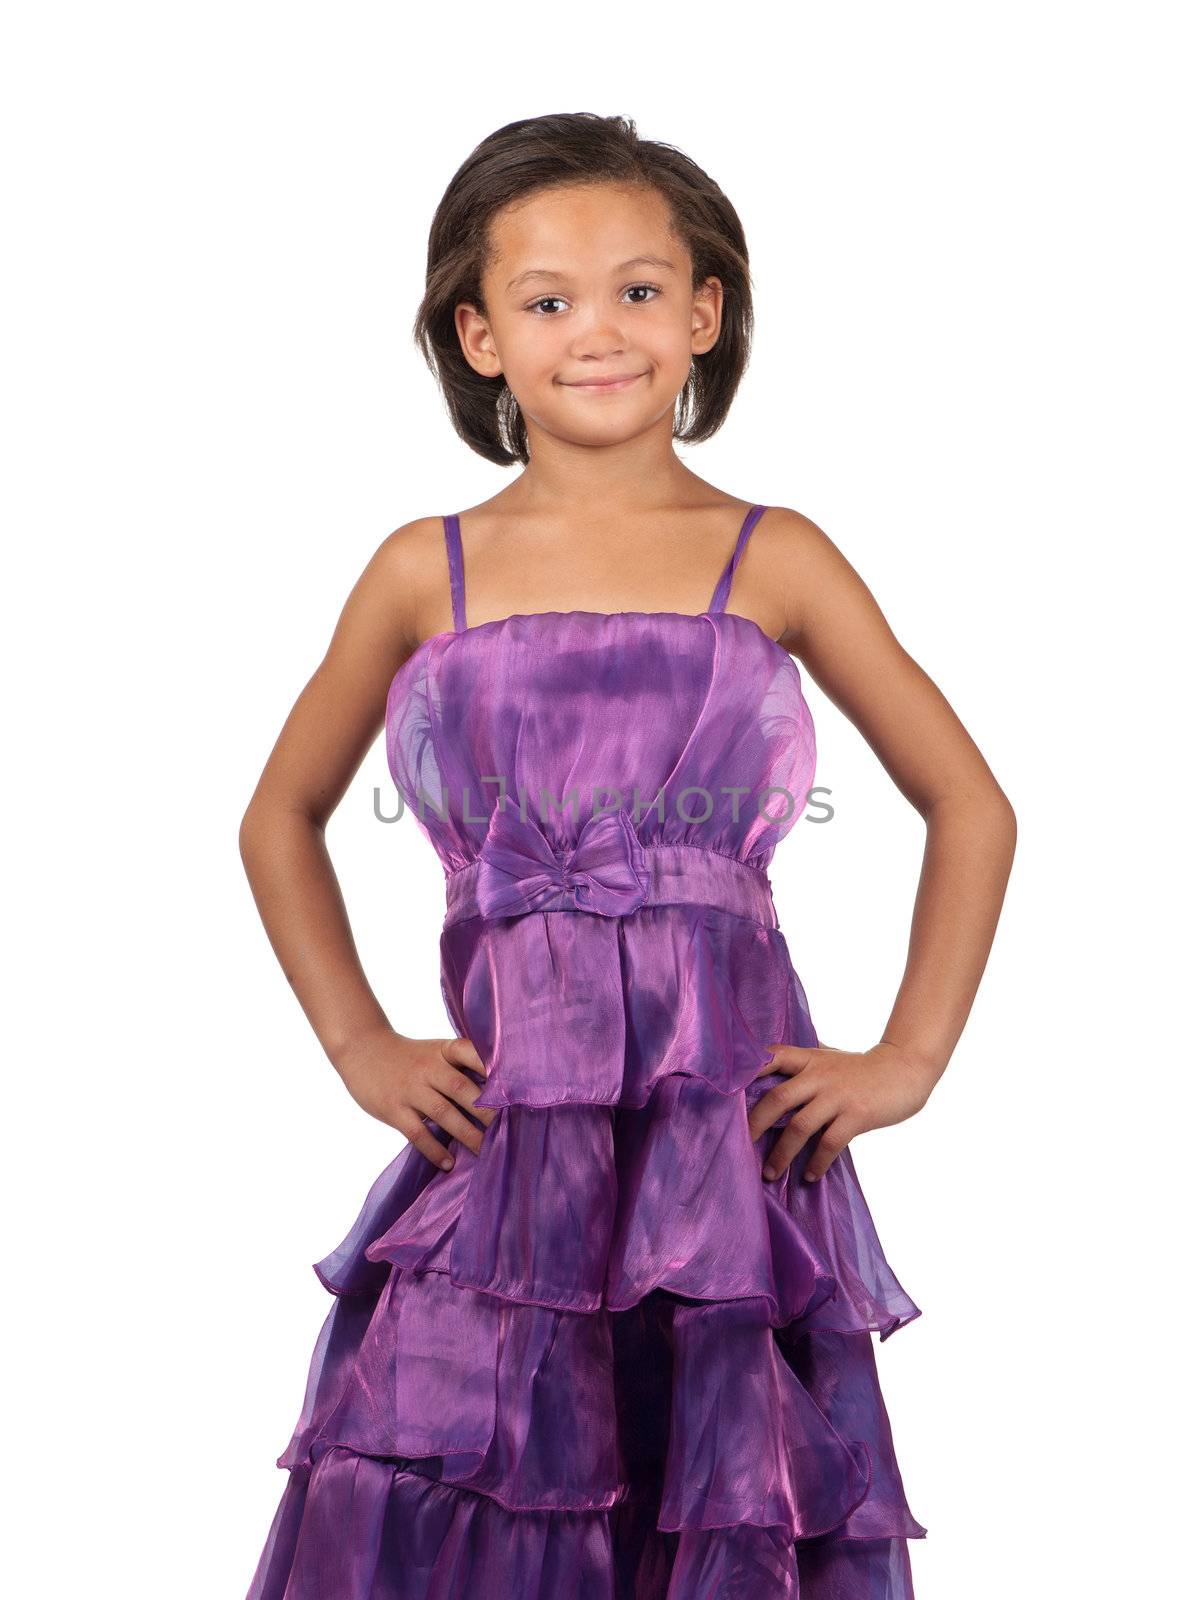 A happy young girl poses in a purple dress.